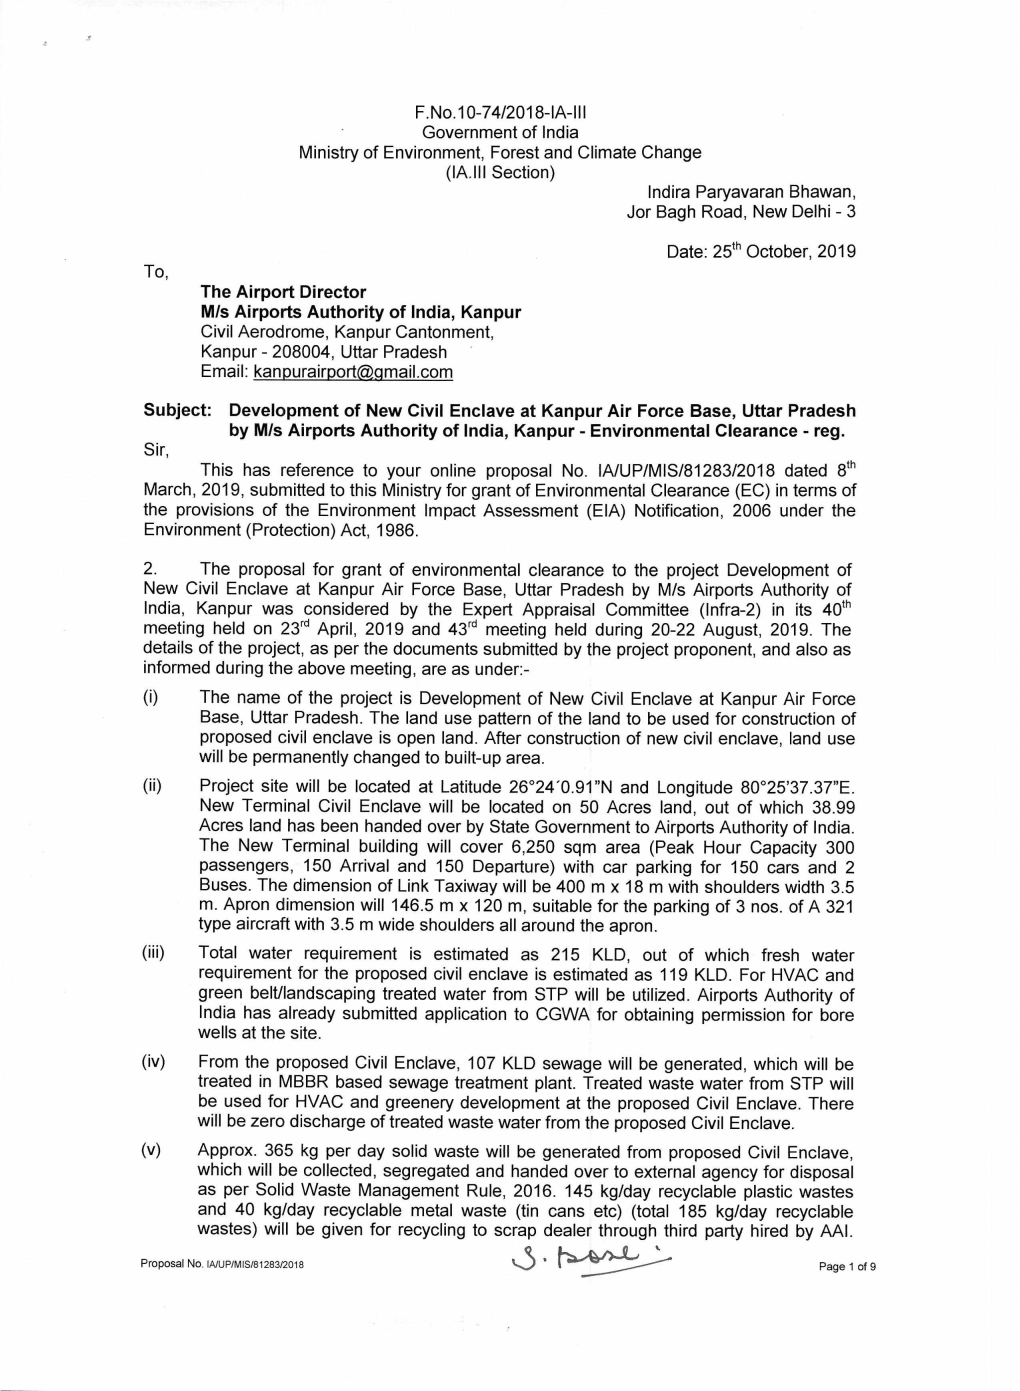 F.No.10-74/2018-1A-III Government of India Ministry of Environment, Forest and Climate Change (IA.111 Section) Indira Paryavaran Bhawan, Jor Bagh Road, New Delhi - 3